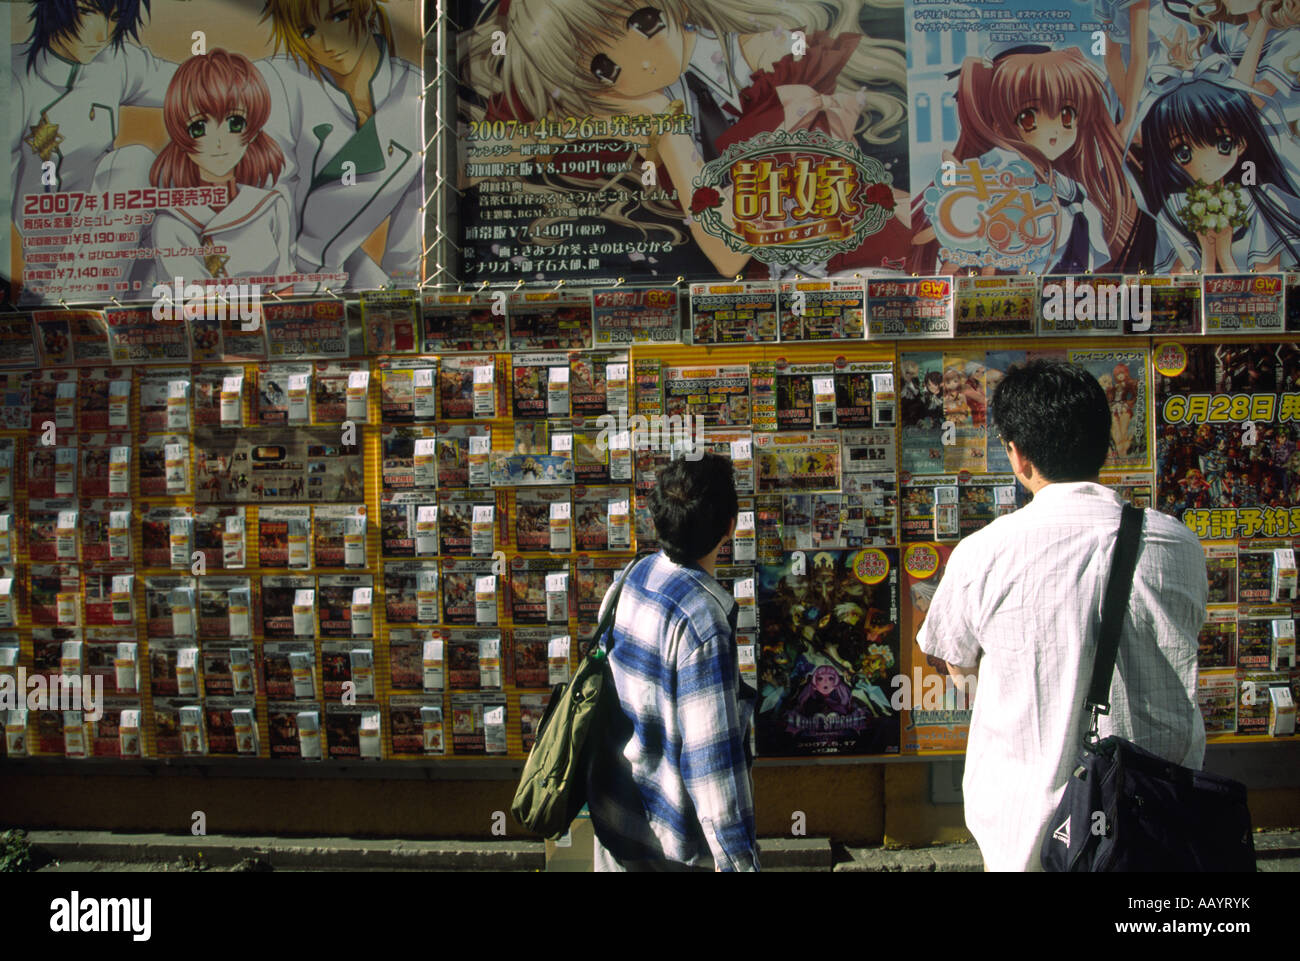 Otaku men looking at posters and vending boxes for toys in a street in Akihabara in Tokyo, Japan Stock Photo